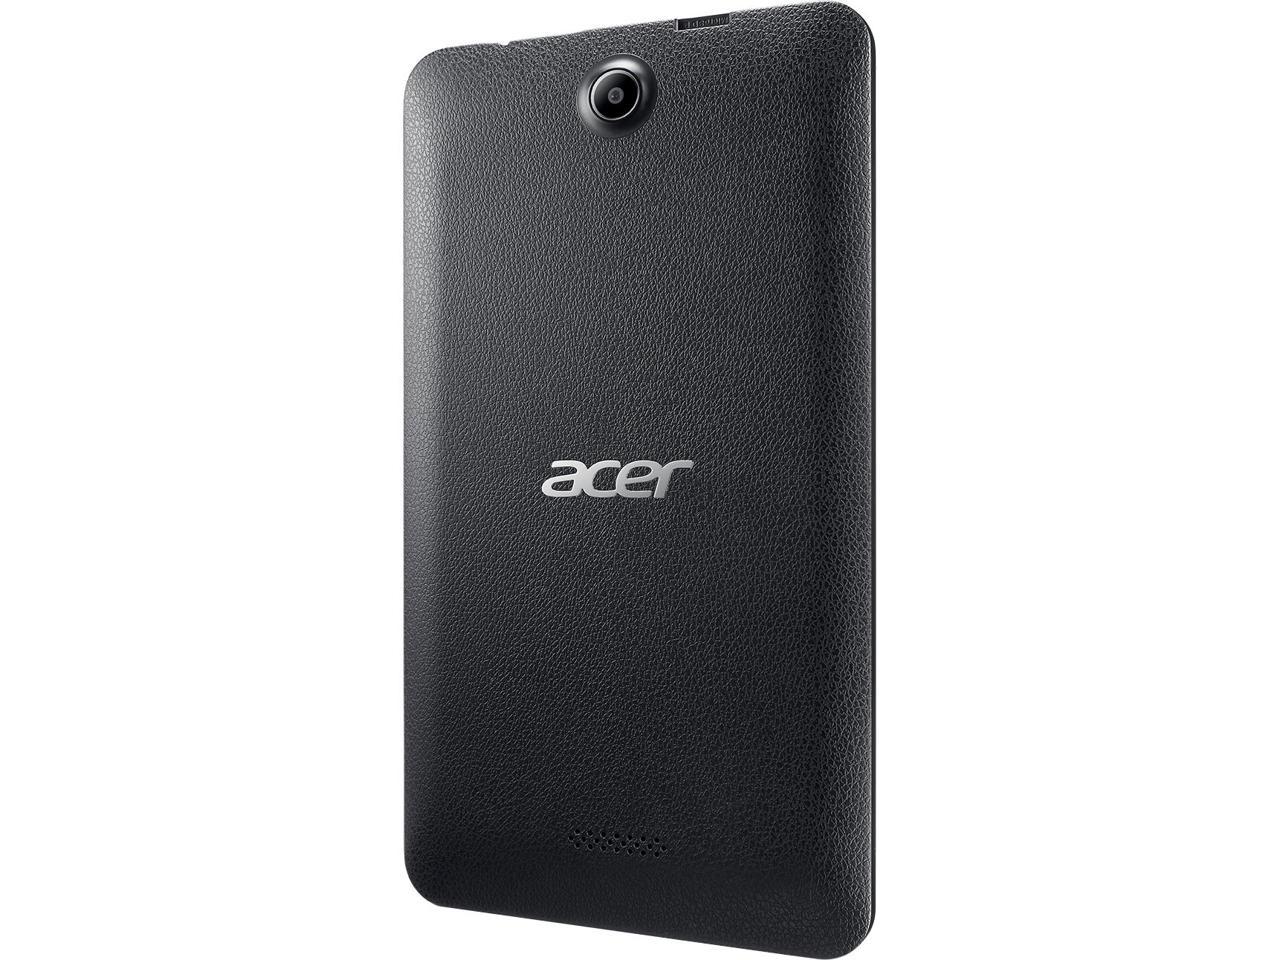 Acer Iconia One 7 B1-790-K46E Tablet - 7" - 1 GB DDR3L SDRAM - MediaTek Cortex A53 MT8163 Quad-core (4 Core) 1.30 GHz - 8 GB - Android 6.0 Marshmallow - 1280 x 720 - In-plane Switching (IPS) Technology